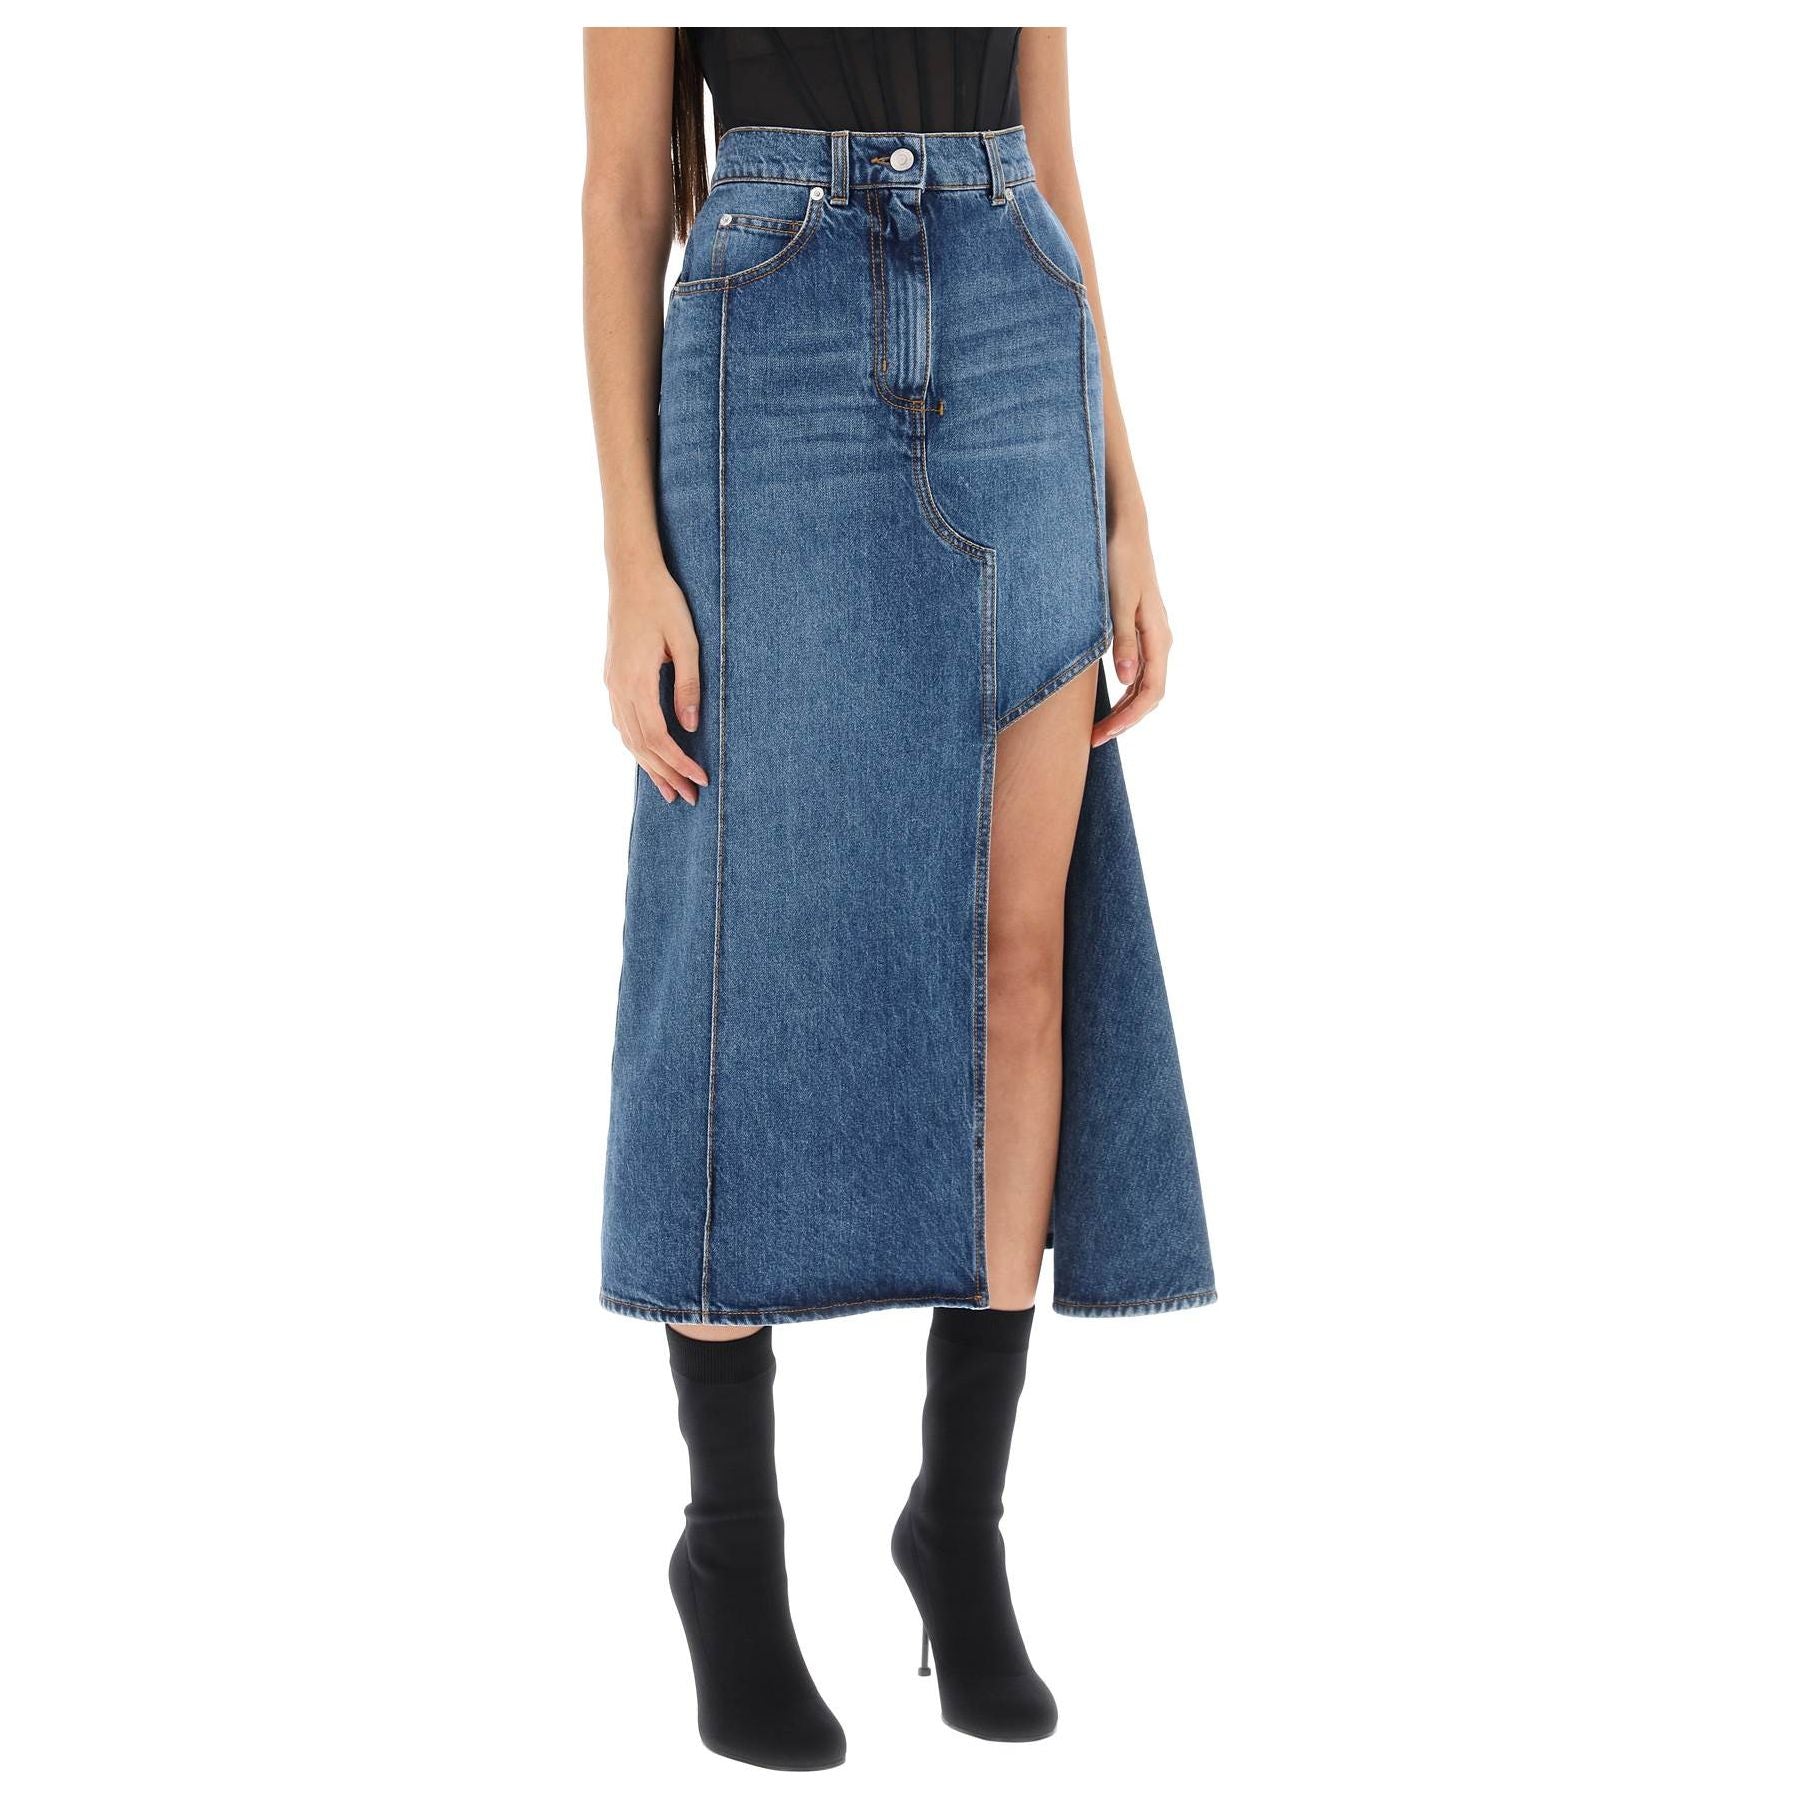 Stone-Washed Denim Skirt with Cut Out